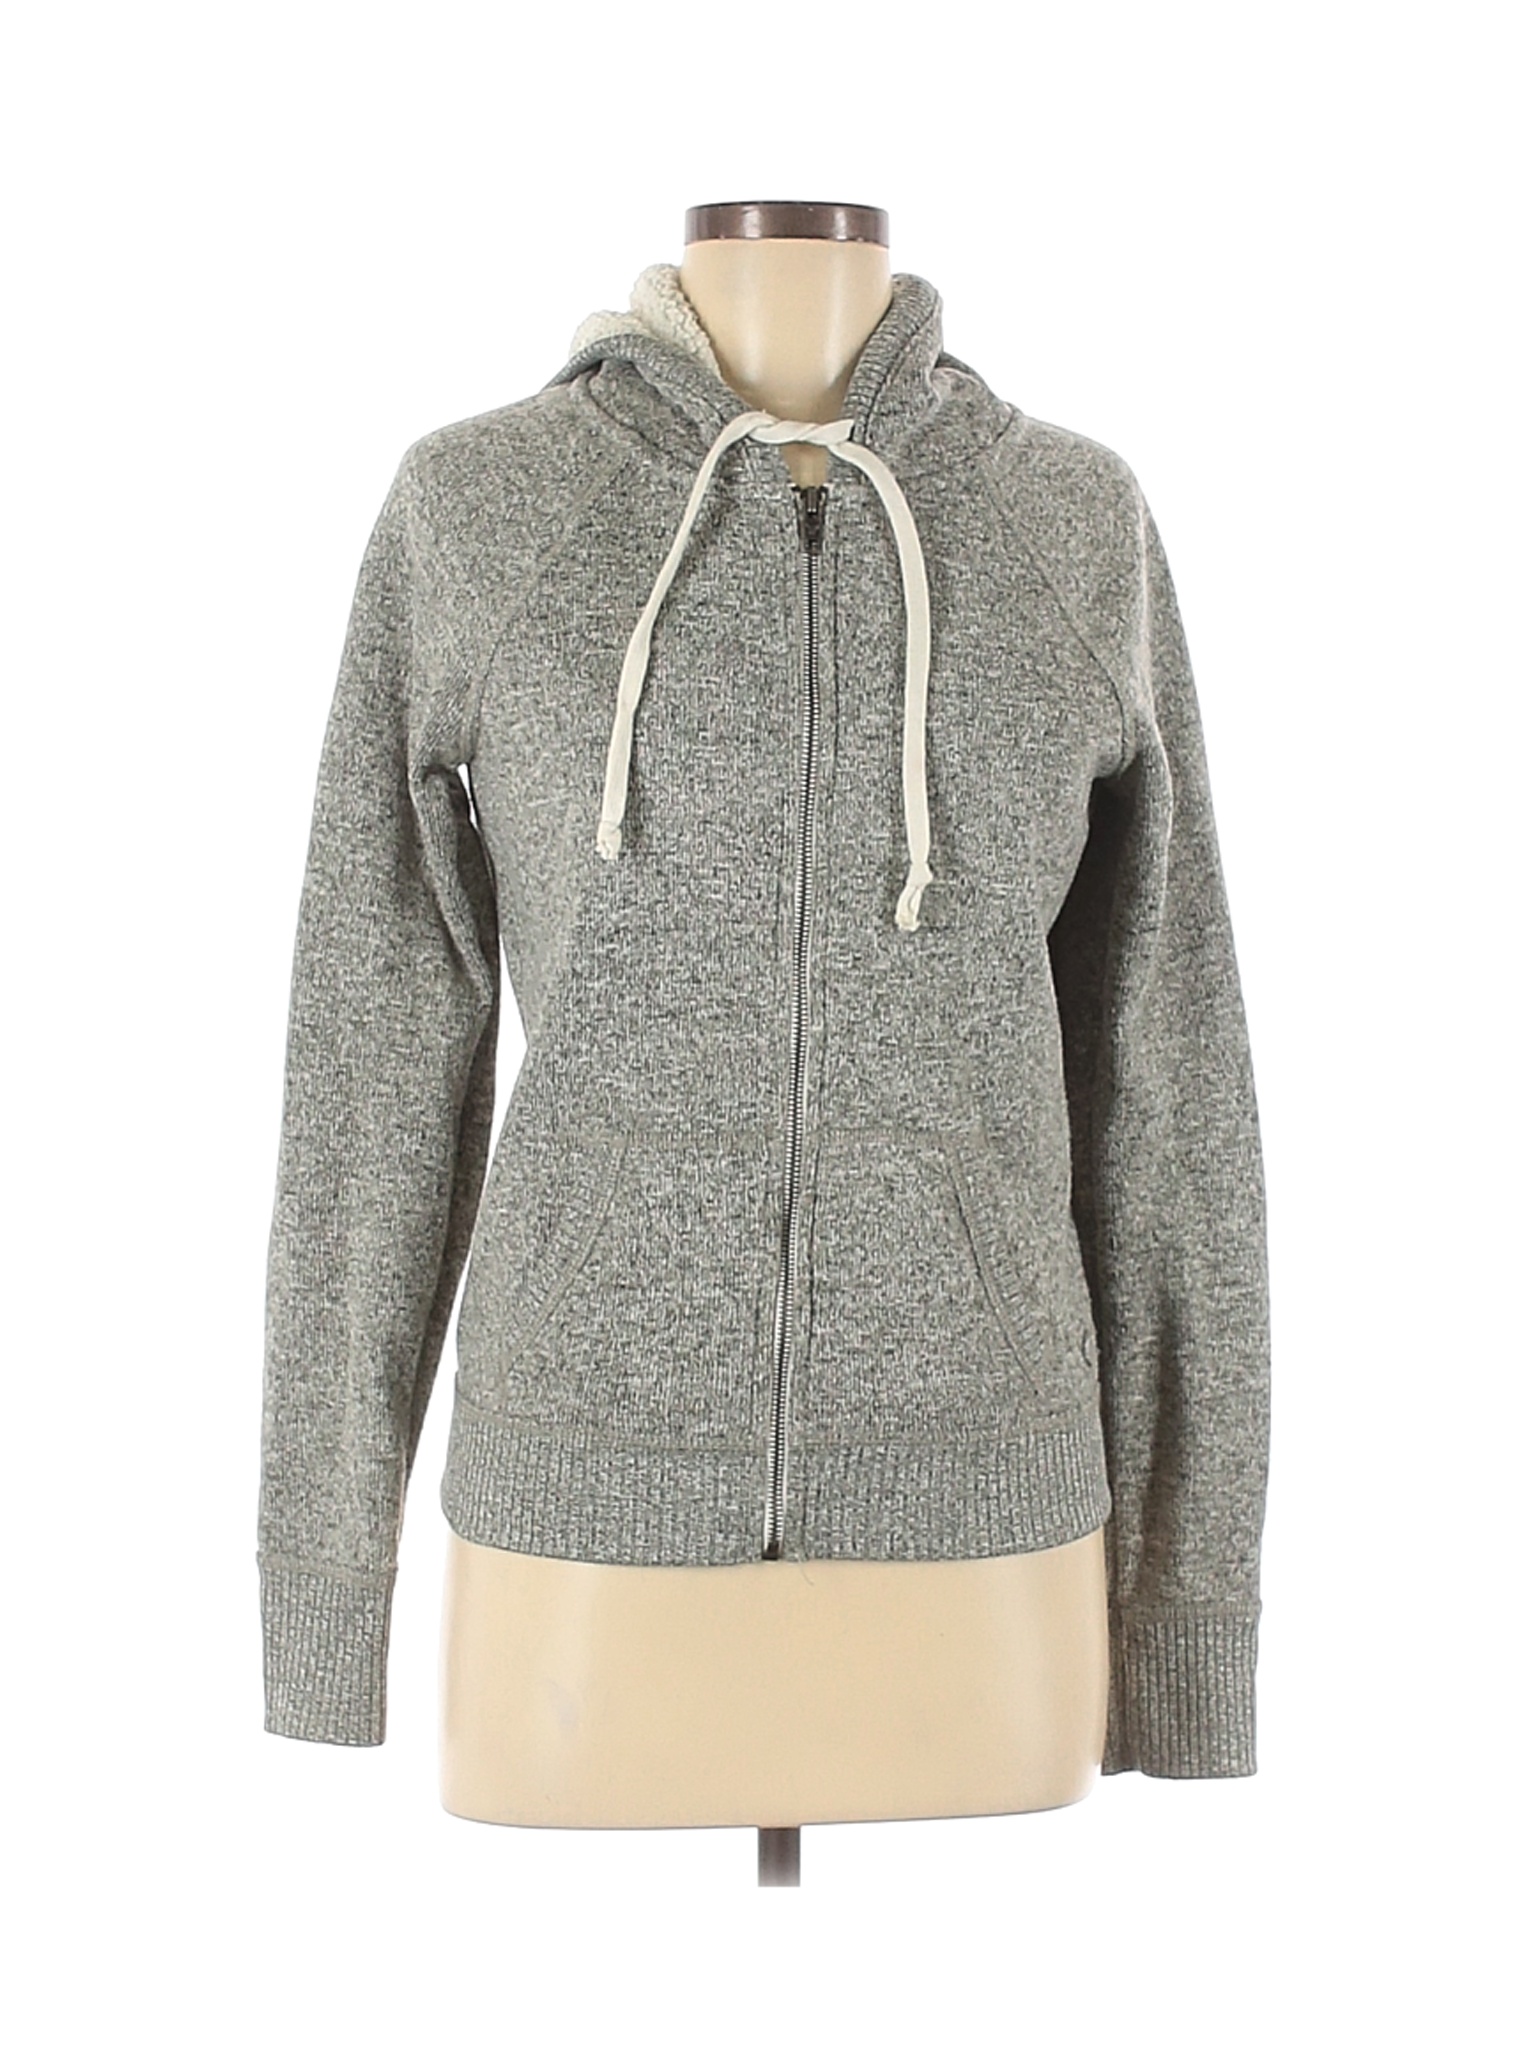 American Eagle Outfitters Women Gray Zip Up Hoodie M | eBay